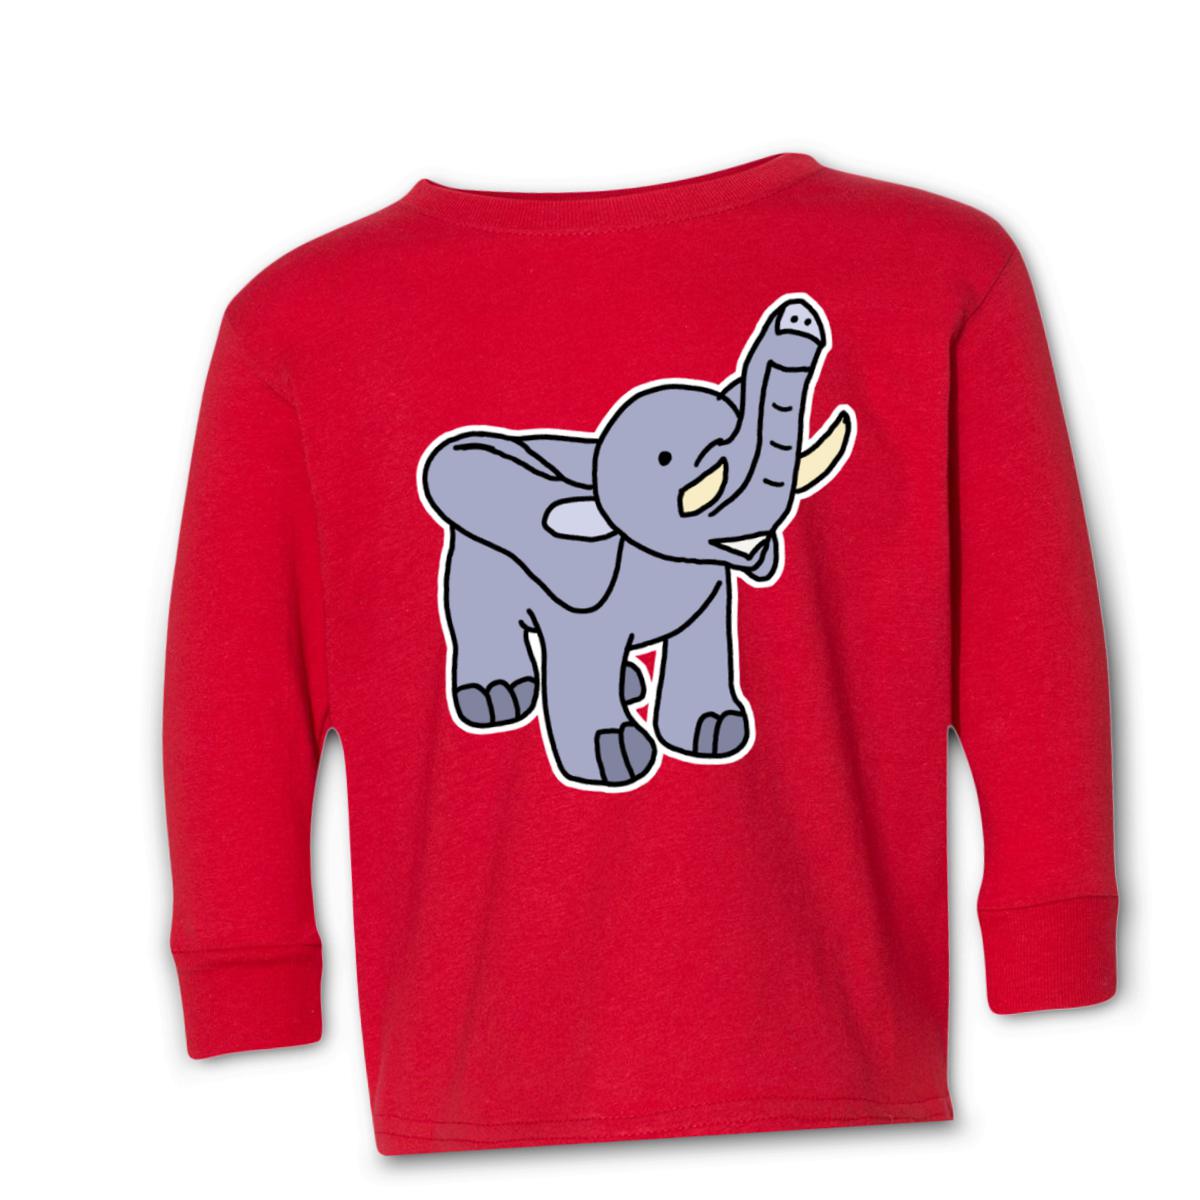 Toy Elephant Toddler Long Sleeve Tee 56T red